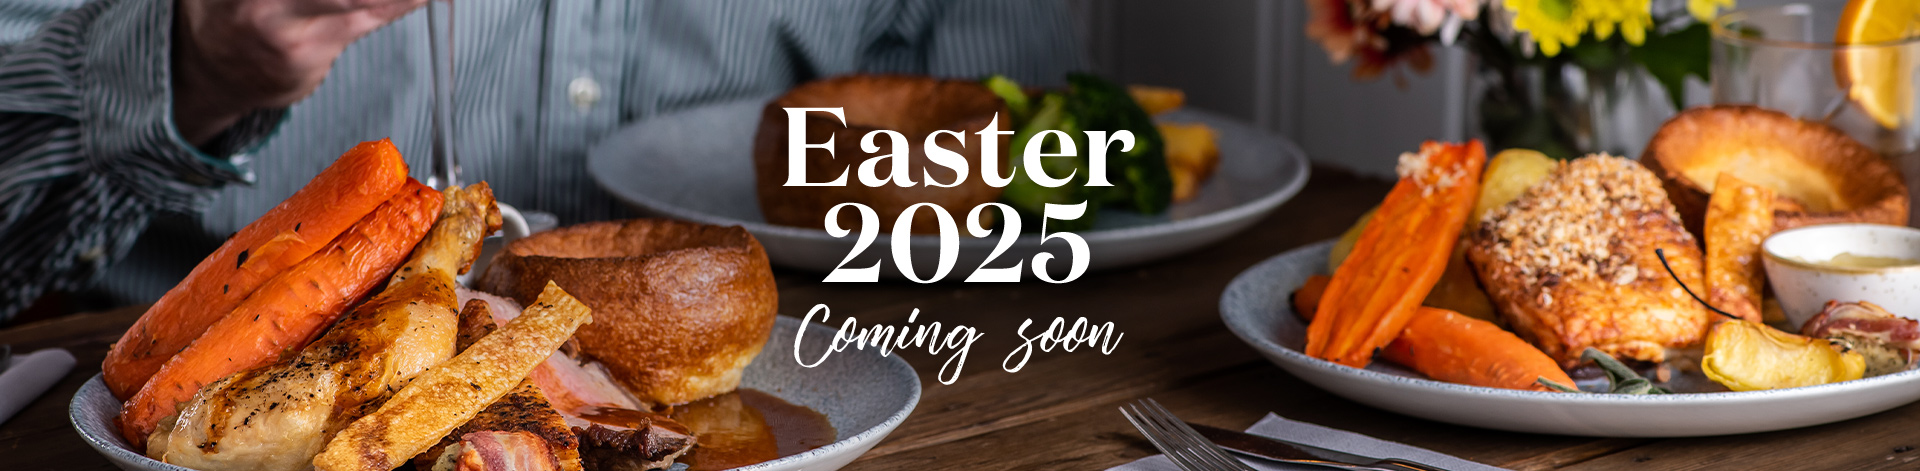 Easter at The Harrow in Warlingham